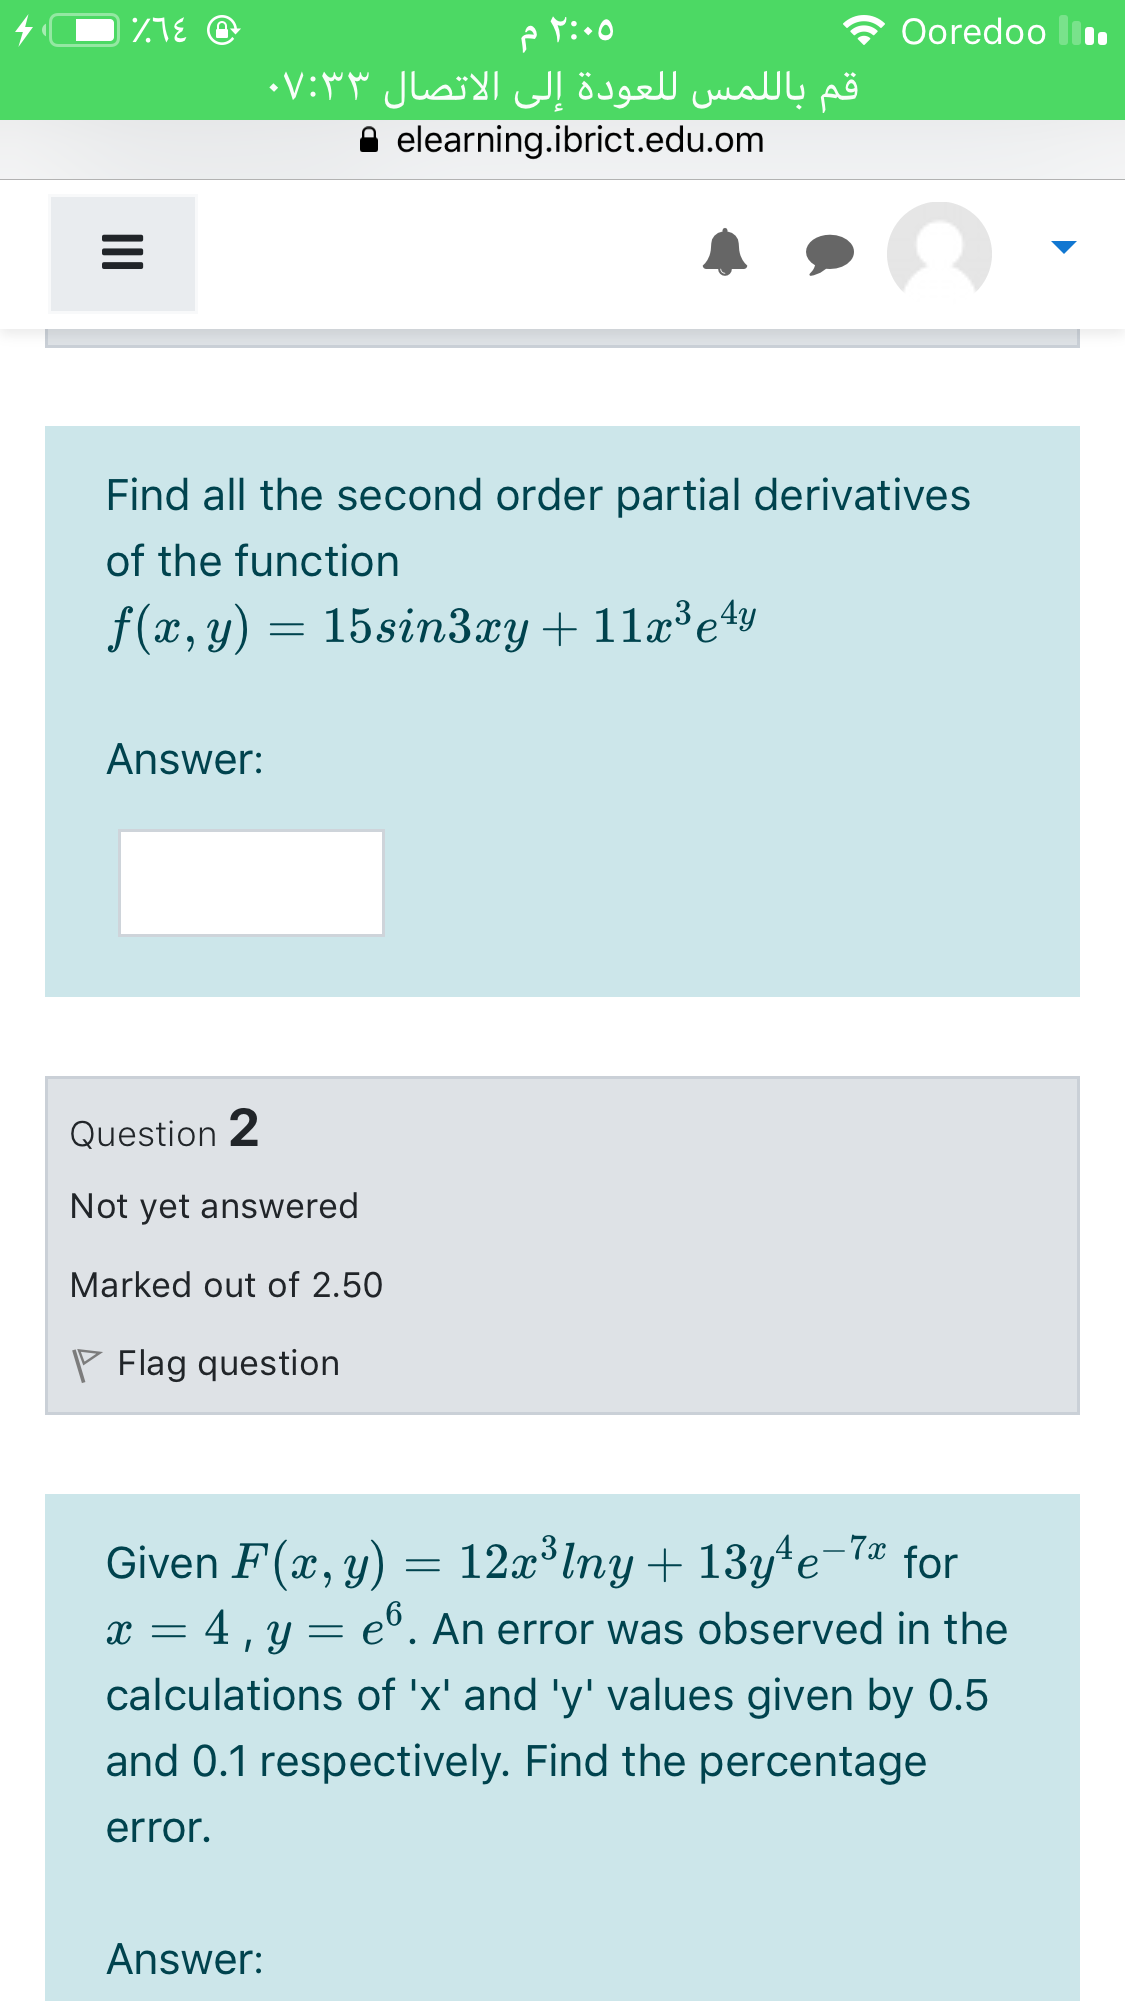 Ooredoo ll.
قم باللمس ل لعودة إلى الاتصال ۰۷:۳۳
elearning.ibrict.edu.om
Find all the second order partial derivatives
of the function
f(x, y) = 15sin3xy+ 11x³e4y
Answer:
Question 2
Not yet answered
Marked out of 2.50
P Flag question
- 7x
Given F(x, y) = 12x lny + 13y*e
x = 4 , y =
for
e°. An error was observed in the
calculations of 'x' and 'y' values given by 0.5
and 0.1 respectively. Find the percentage
error.
Answer:
II
